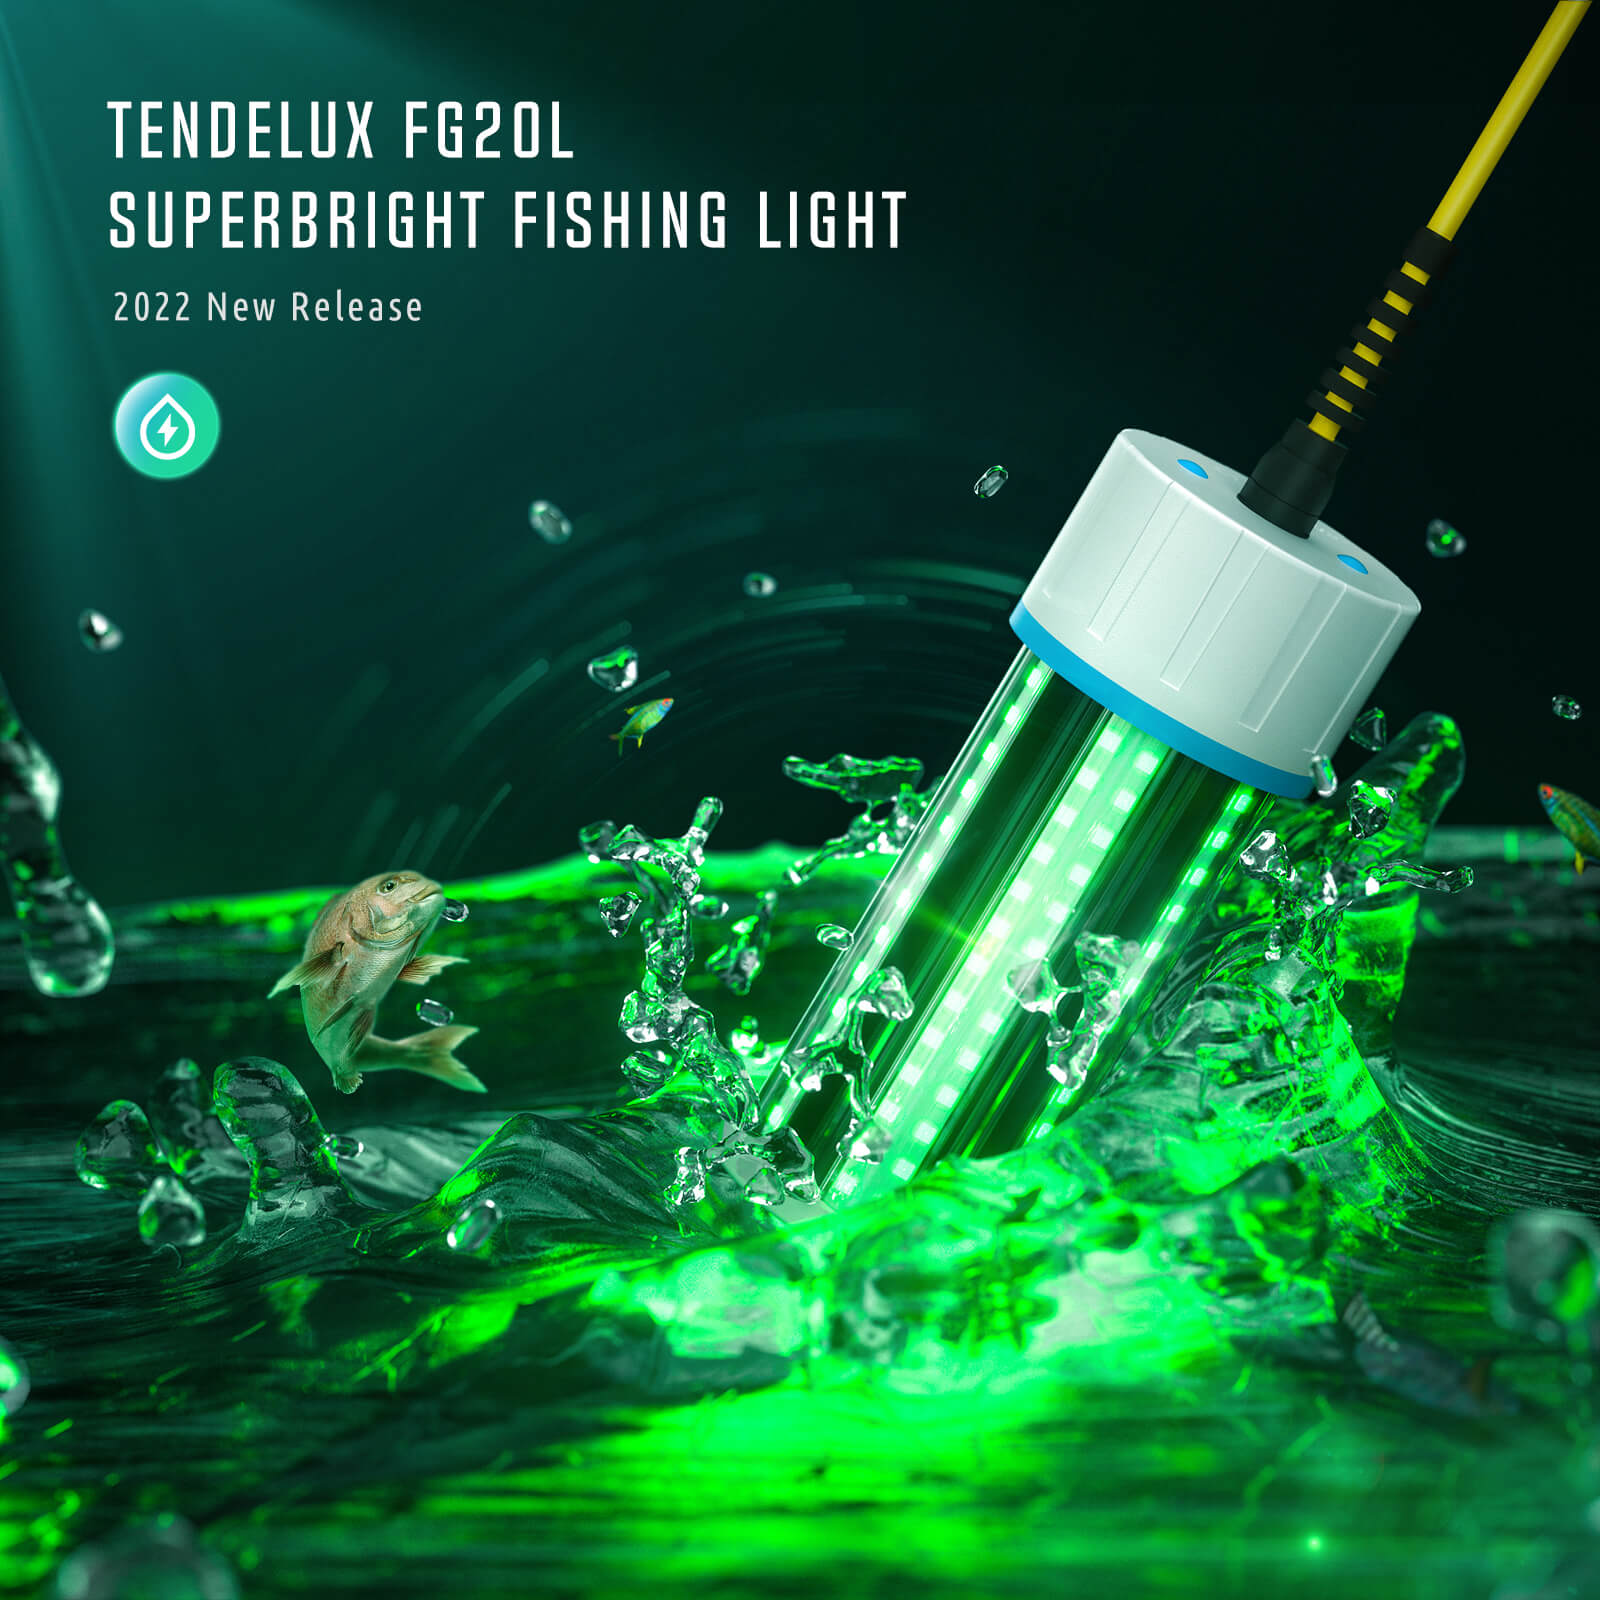 Underwater LED Fishing Light - Bright Fishing Lights - Attracts LED